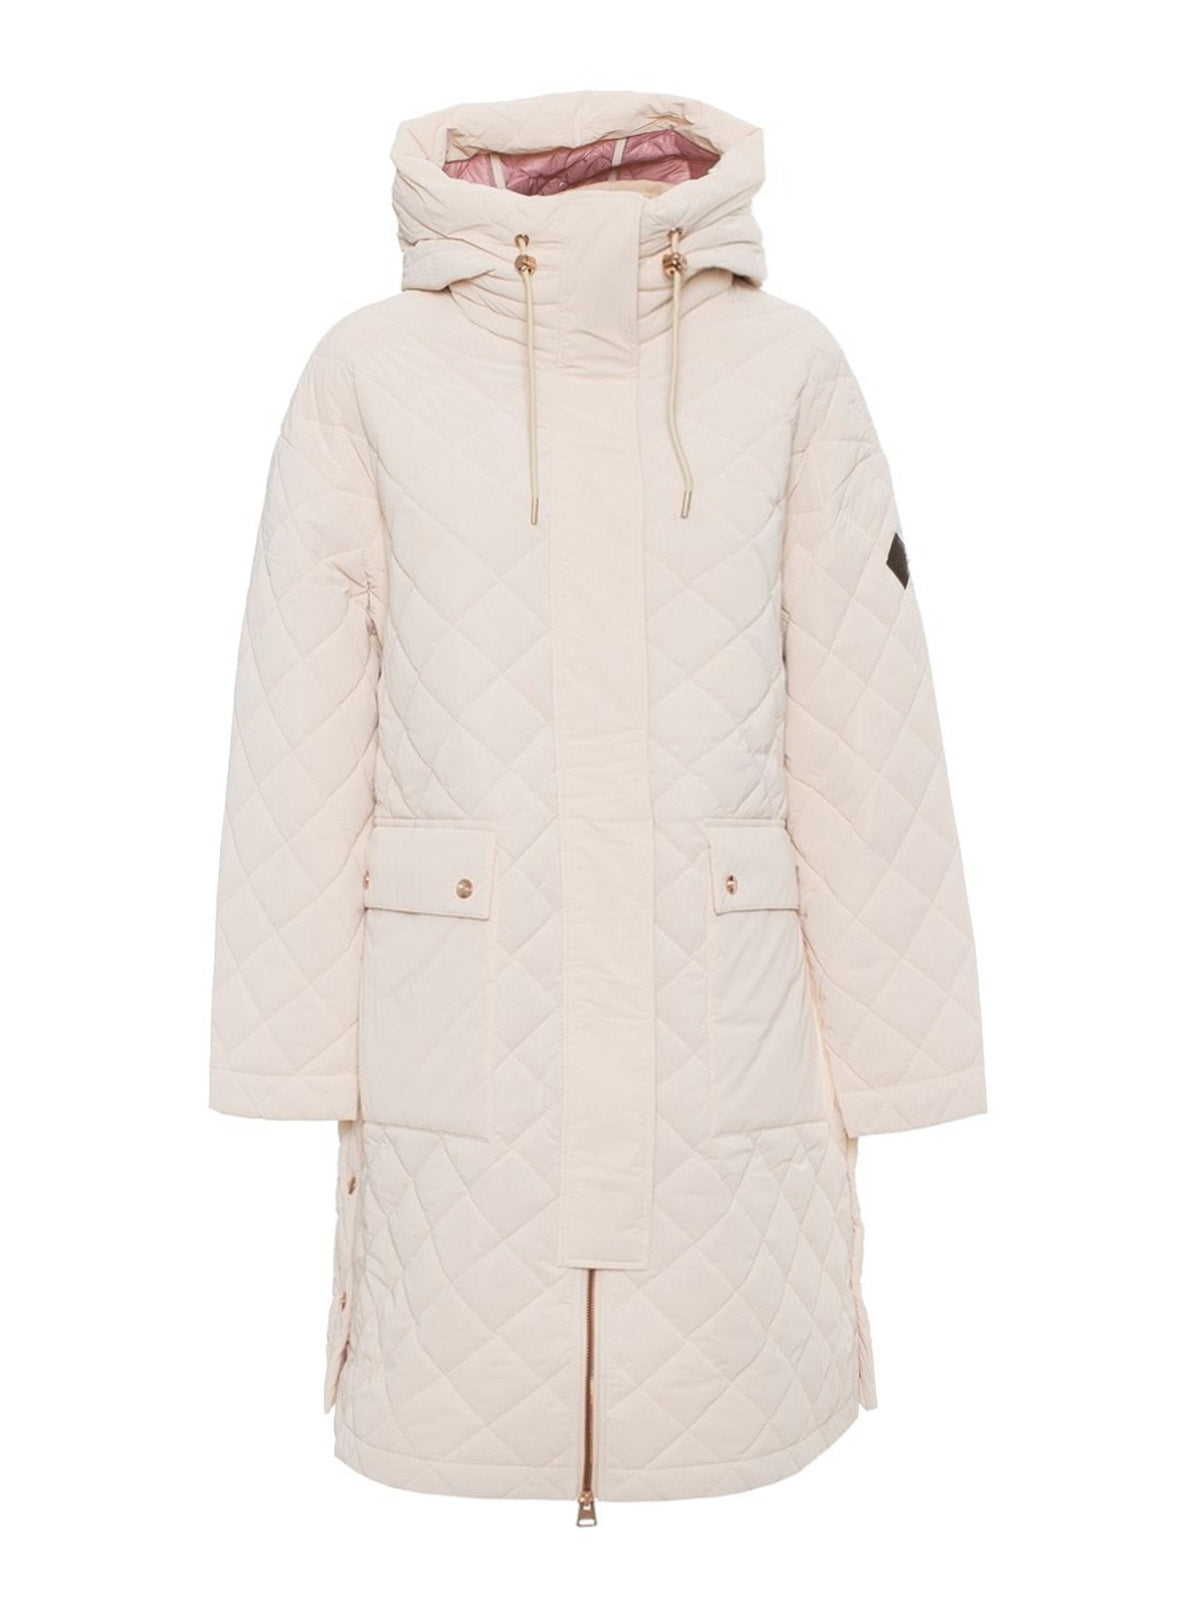 Giacche Donna Husky - Annie Quilted Jacket - Avorio